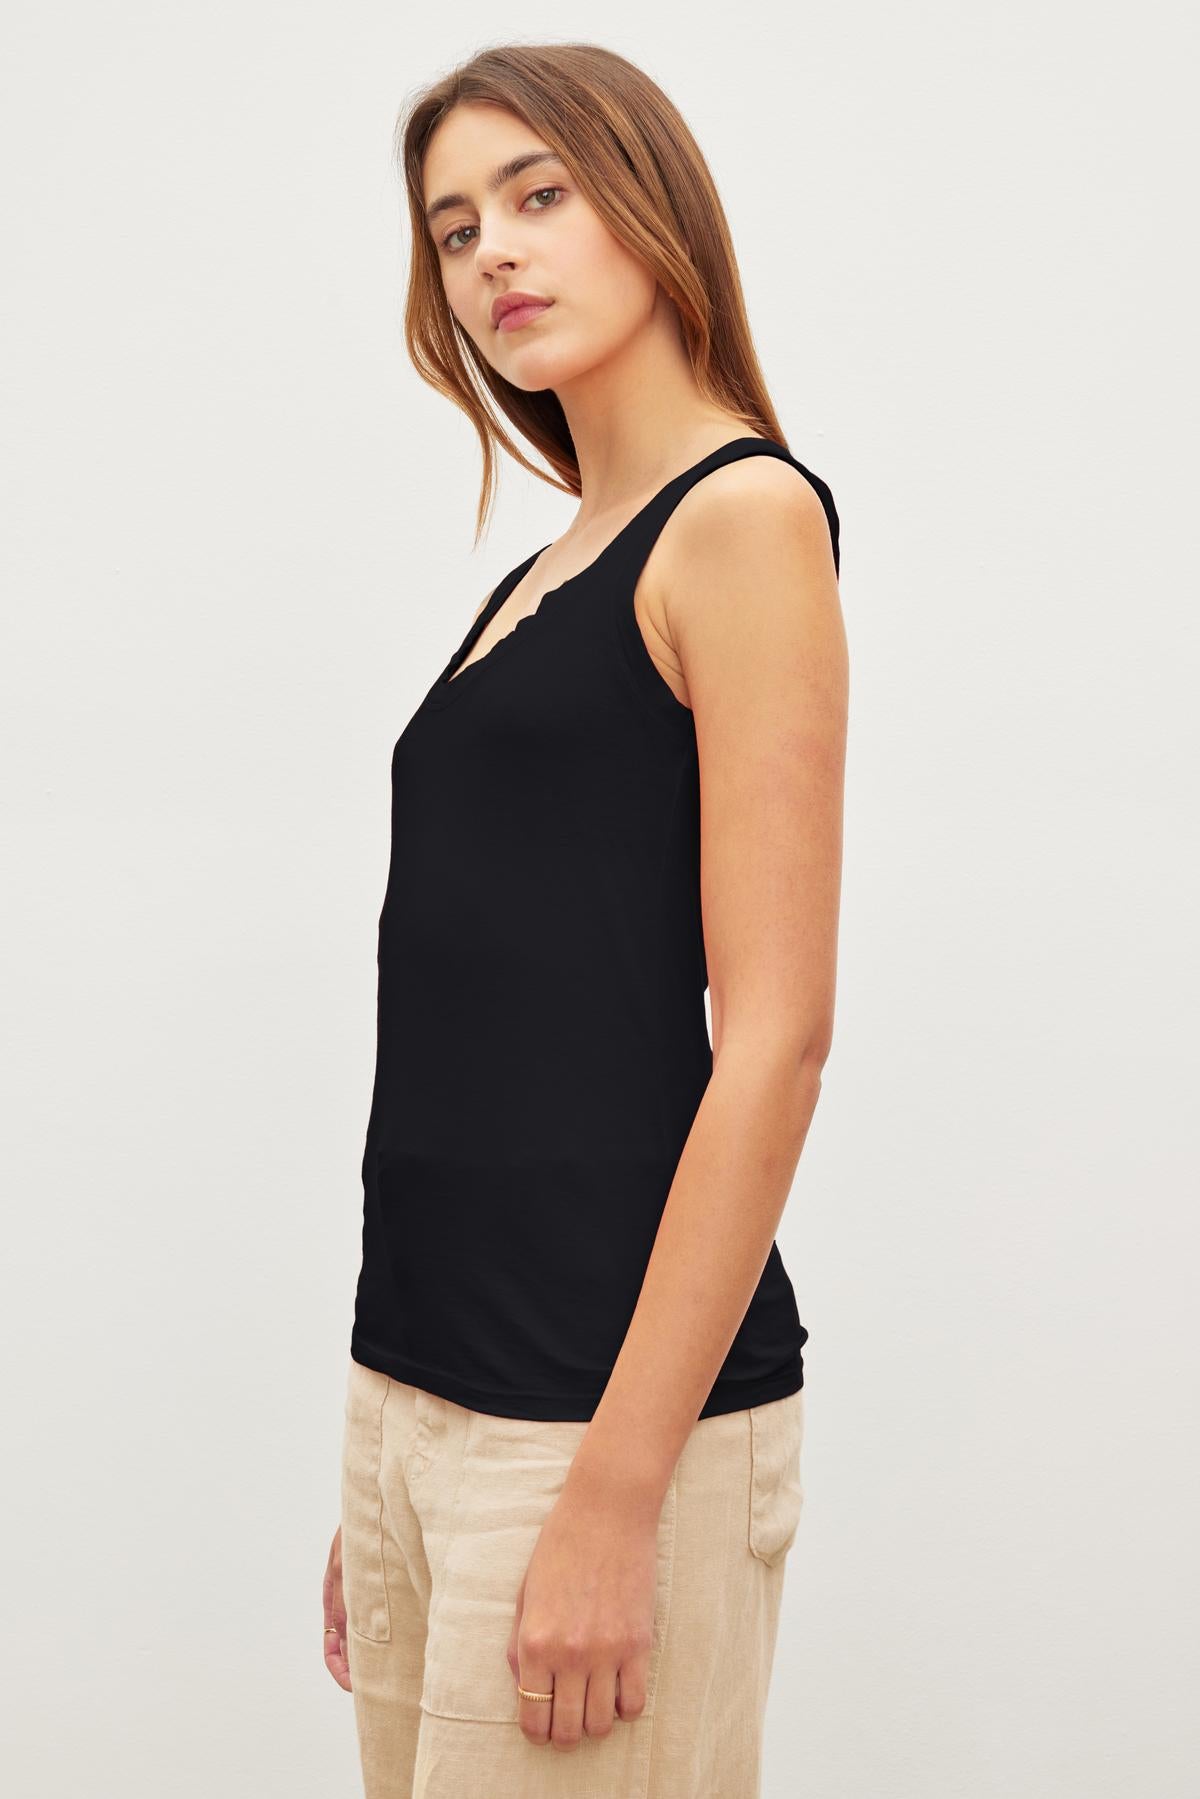 A woman in a Velvet by Graham & Spencer MOSSY GAUZY WHISPER FITTED TANK and beige pants stands against a plain background, looking at the camera with a neutral expression.-36454076580033